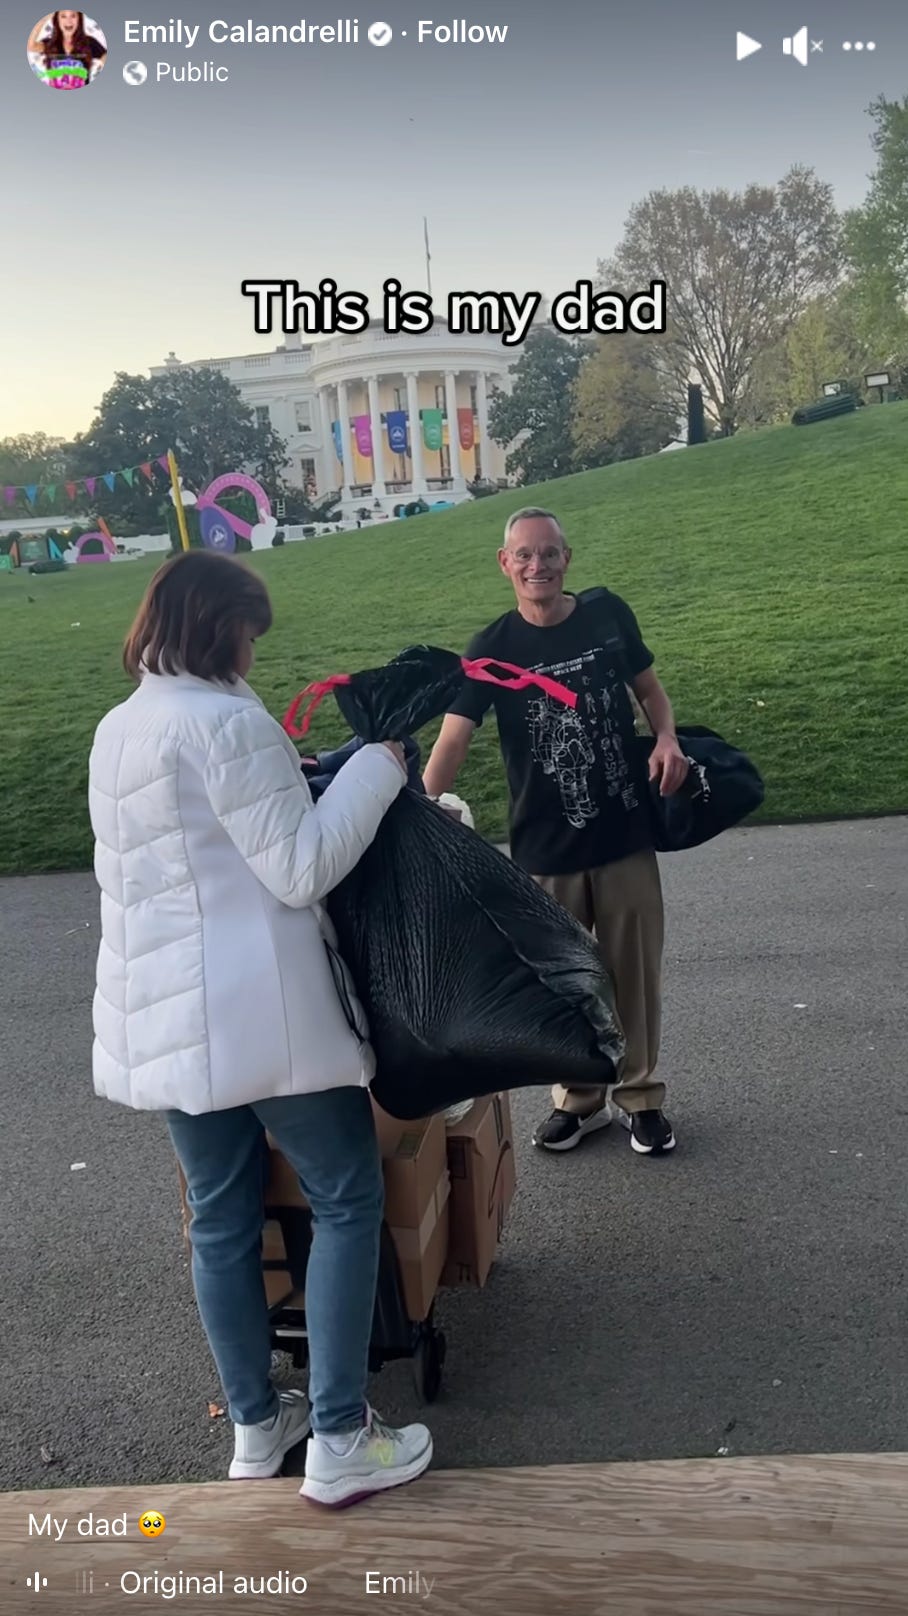 Screengrab of a father and daughter holding bags and boxes